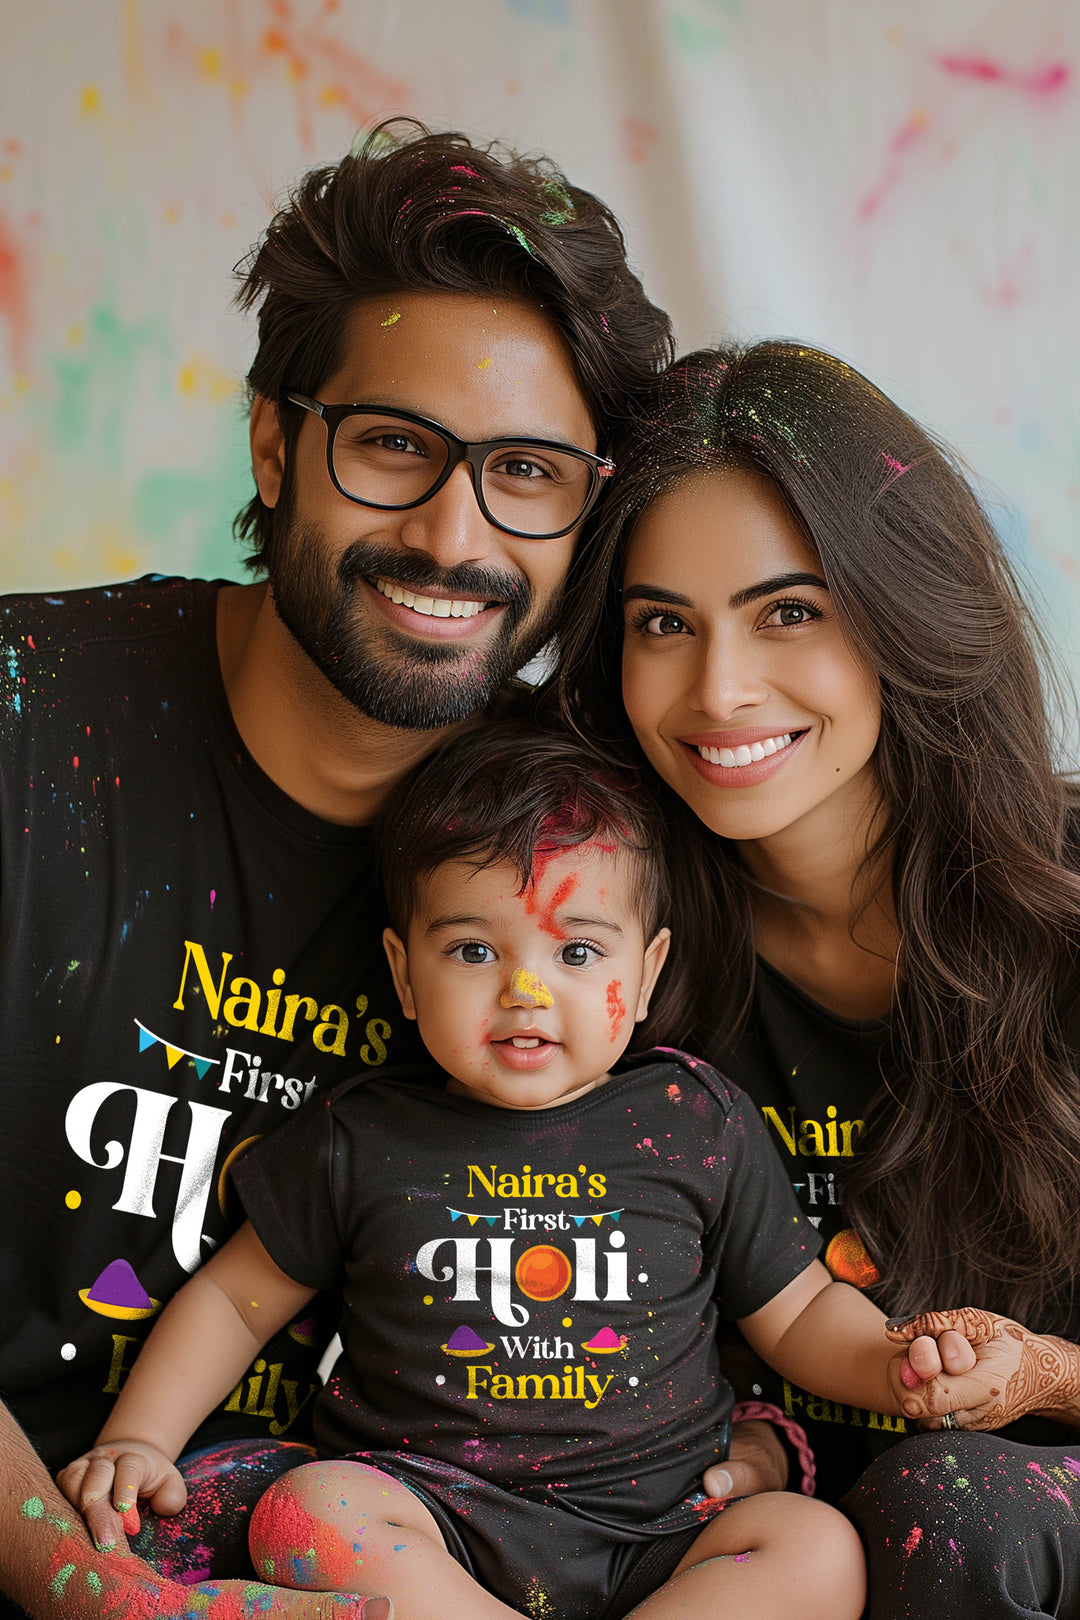 My First Holi With Family w/ Custom Names